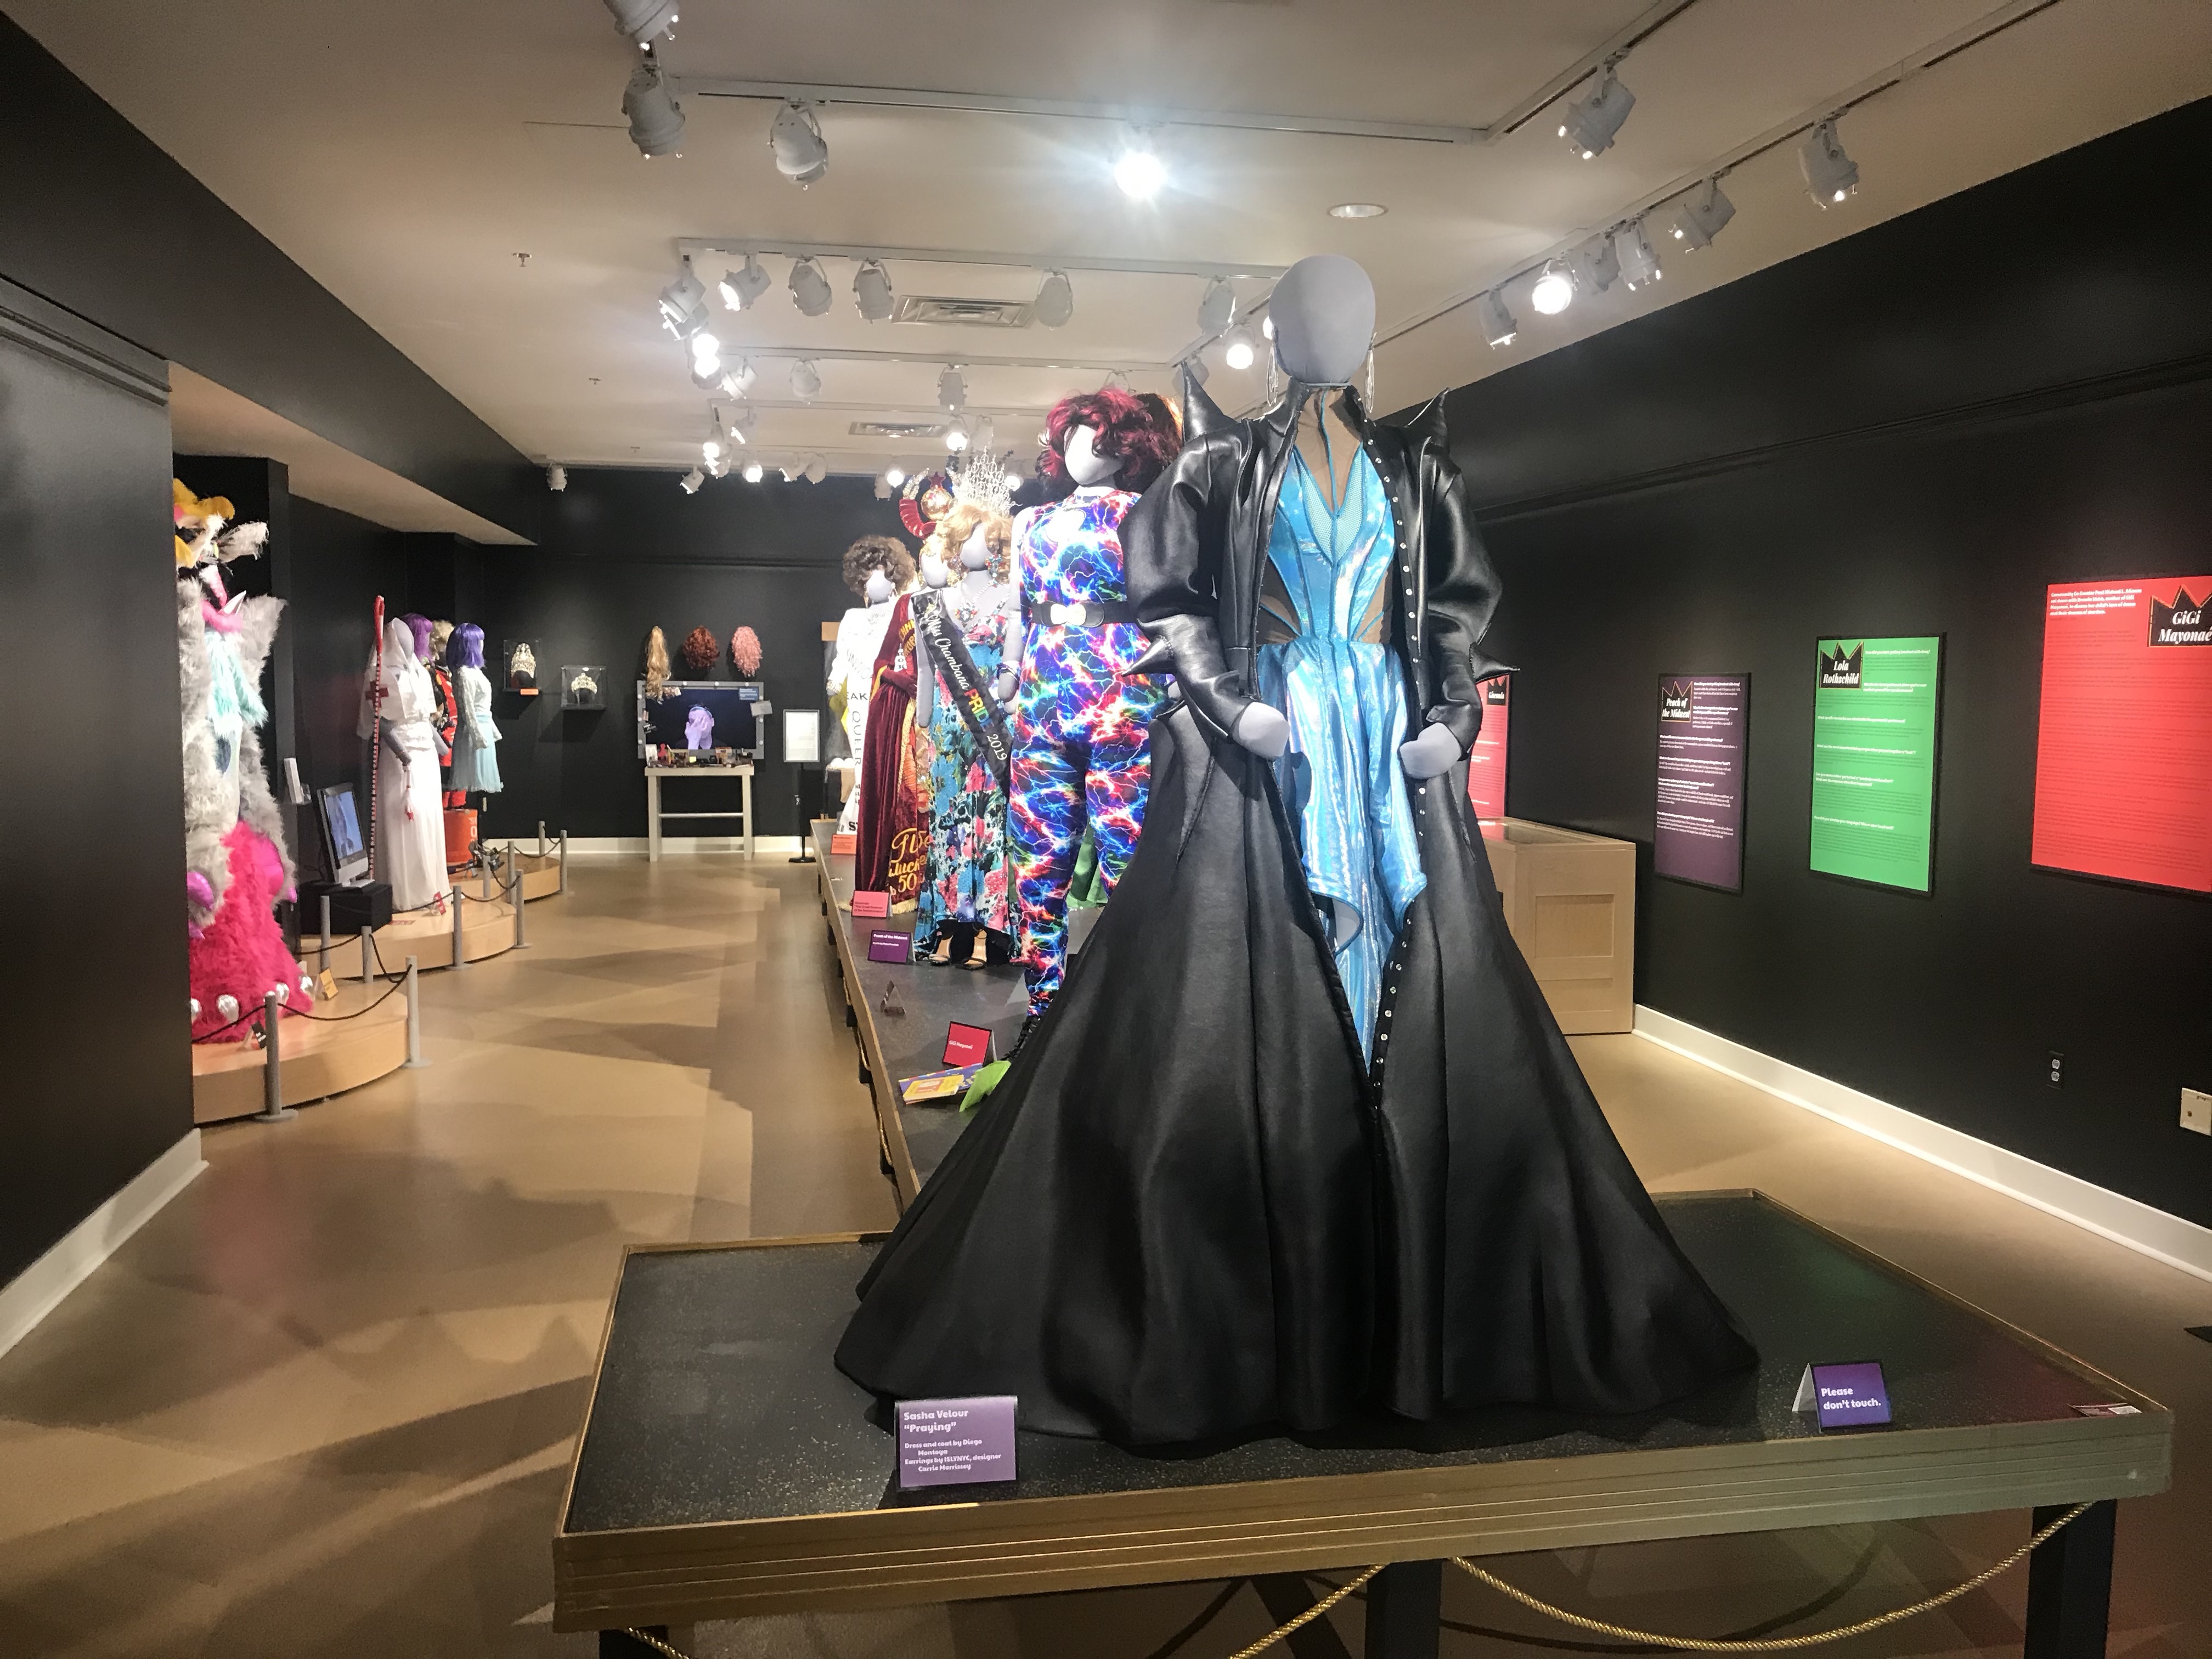 Main exhibit room for In Her Closet featuring drag costumes on grey mannequins. Text descriptions printed on multiple colored posters along black walls.